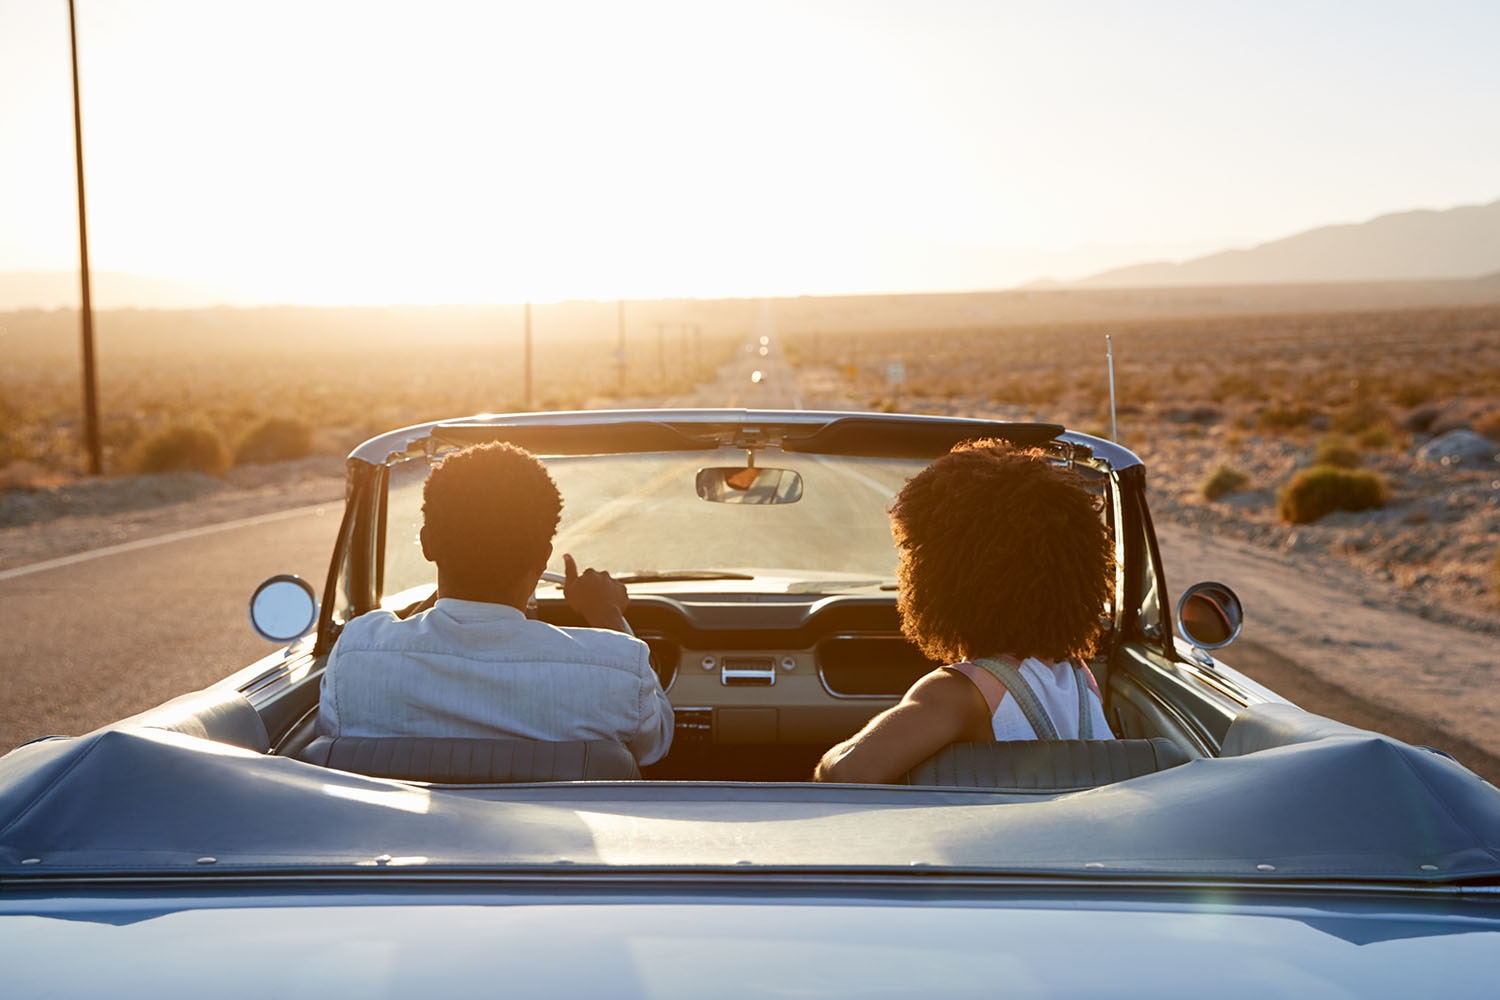 Couple driving in a blue convertible on a desert highway at sunset.